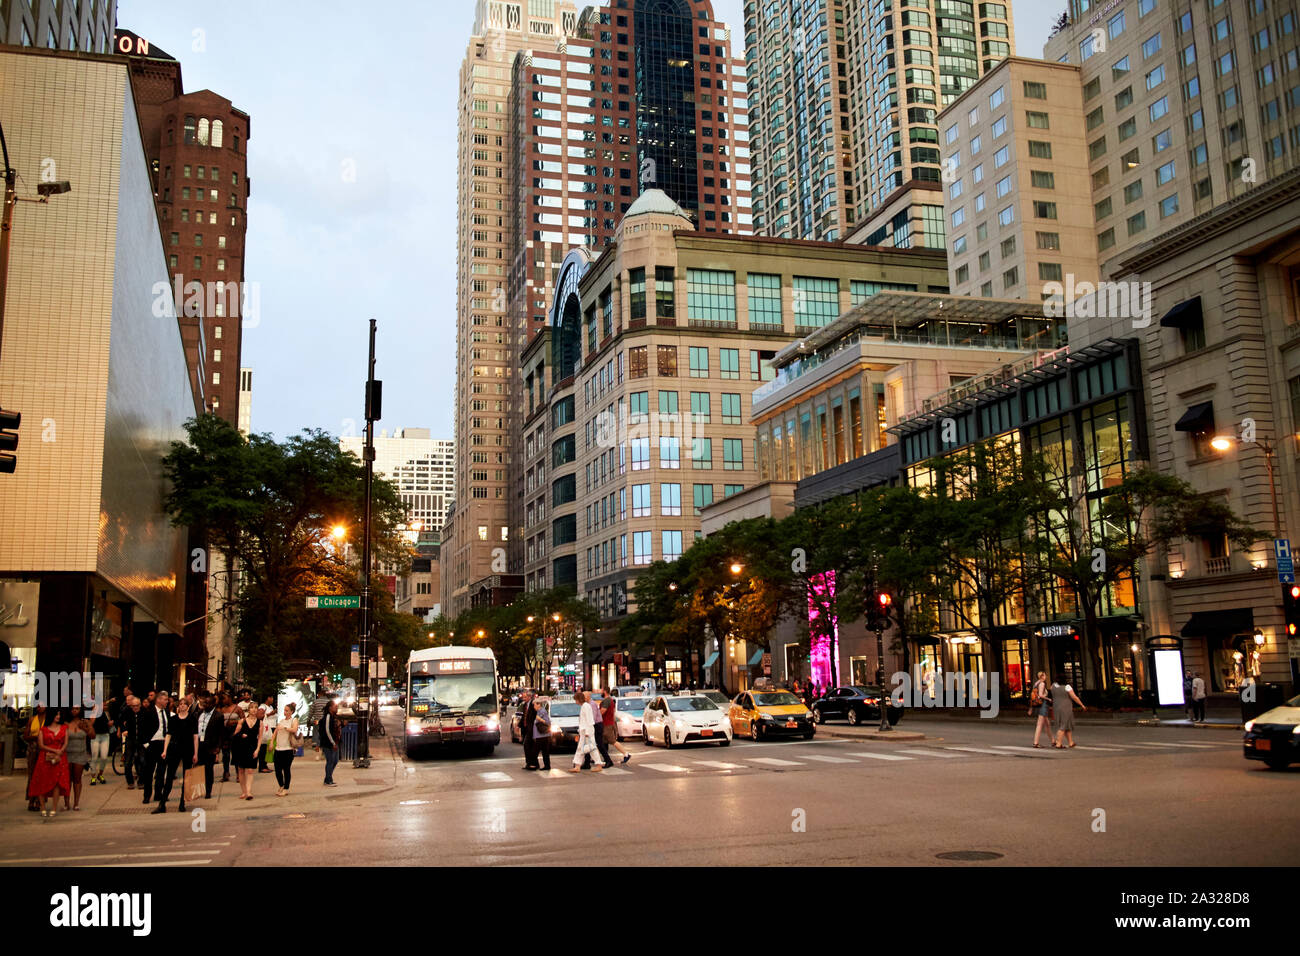 looking along magnificent mile from water tower place at dusk in chicago illinois united states of america Stock Photo